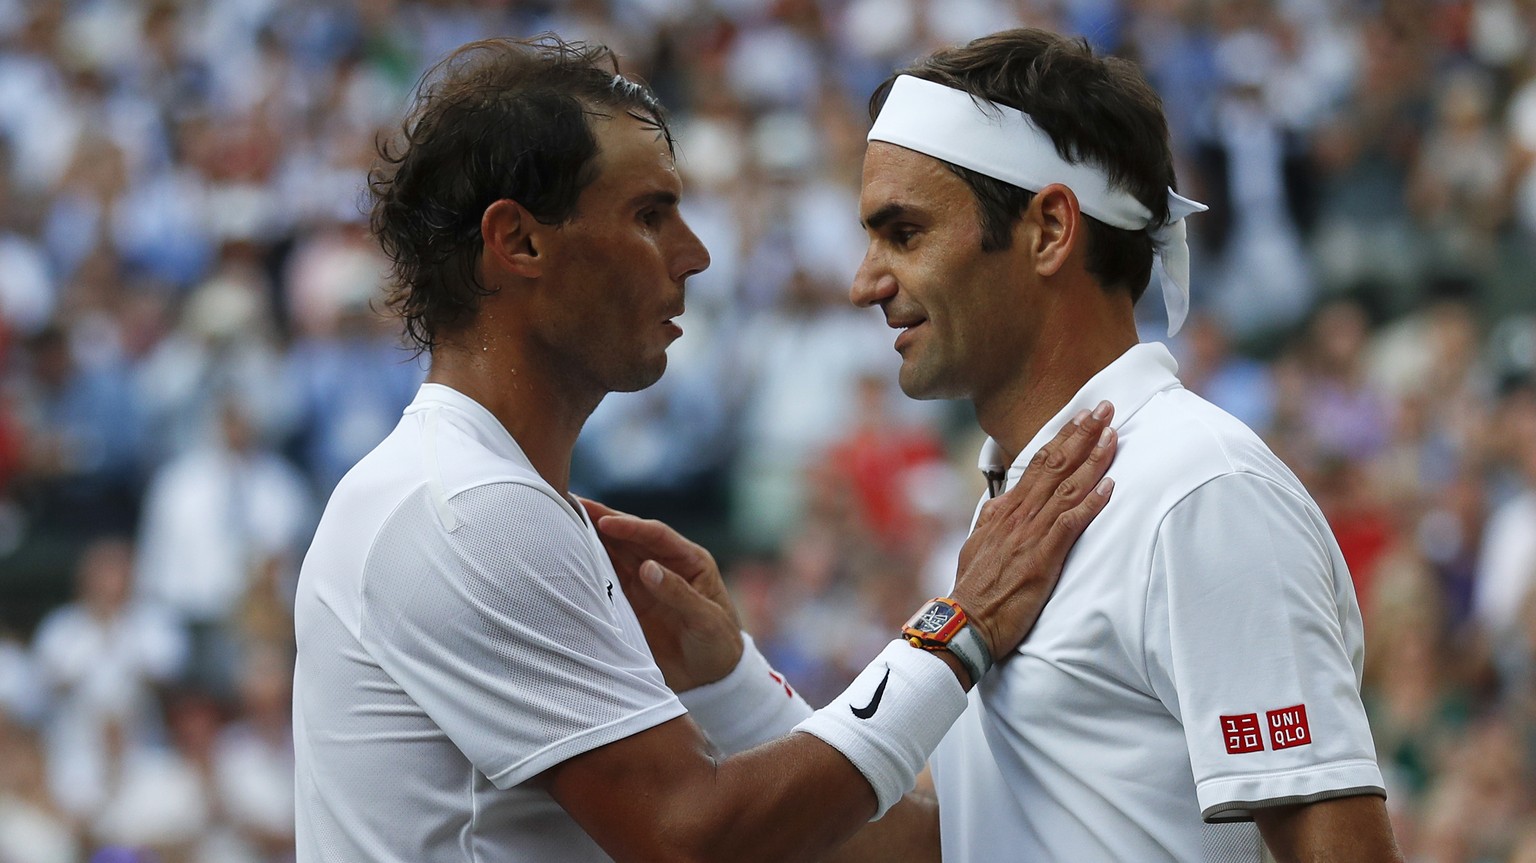 Switzerland's Roger Federer, right, greets Spain's Rafael Nadal after beating him in a Men's singles semifinal match on day eleven of the Wimbledon Tennis Championships in London, Friday, July 12, 201 ...